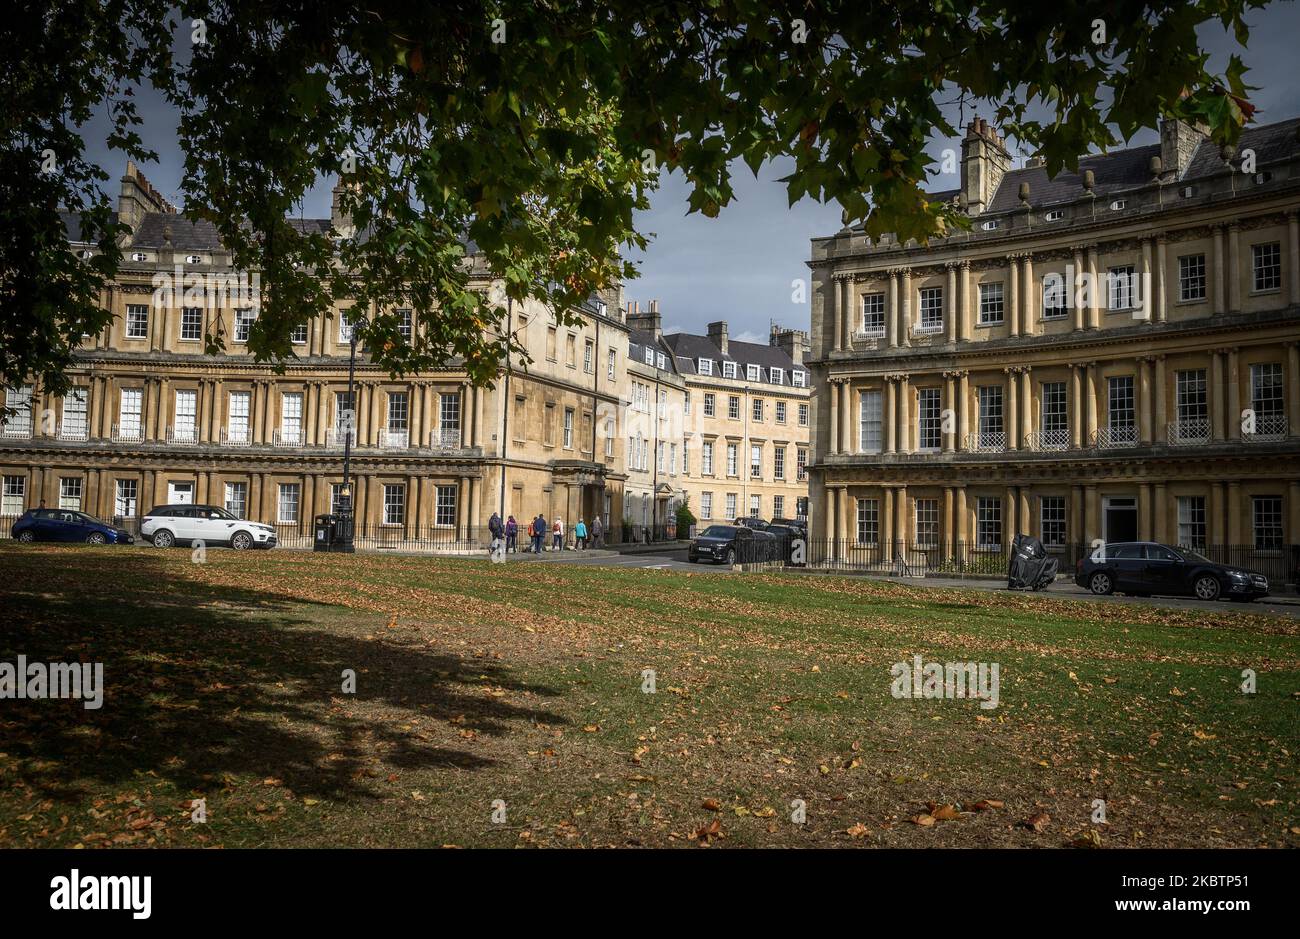 Images from the city of Bath, Somerset, England, United Kingdom. Houses on The Circus. Picture by Paul Heyes, Tuesday/Wednesday October 11/12, 2022. Stock Photo